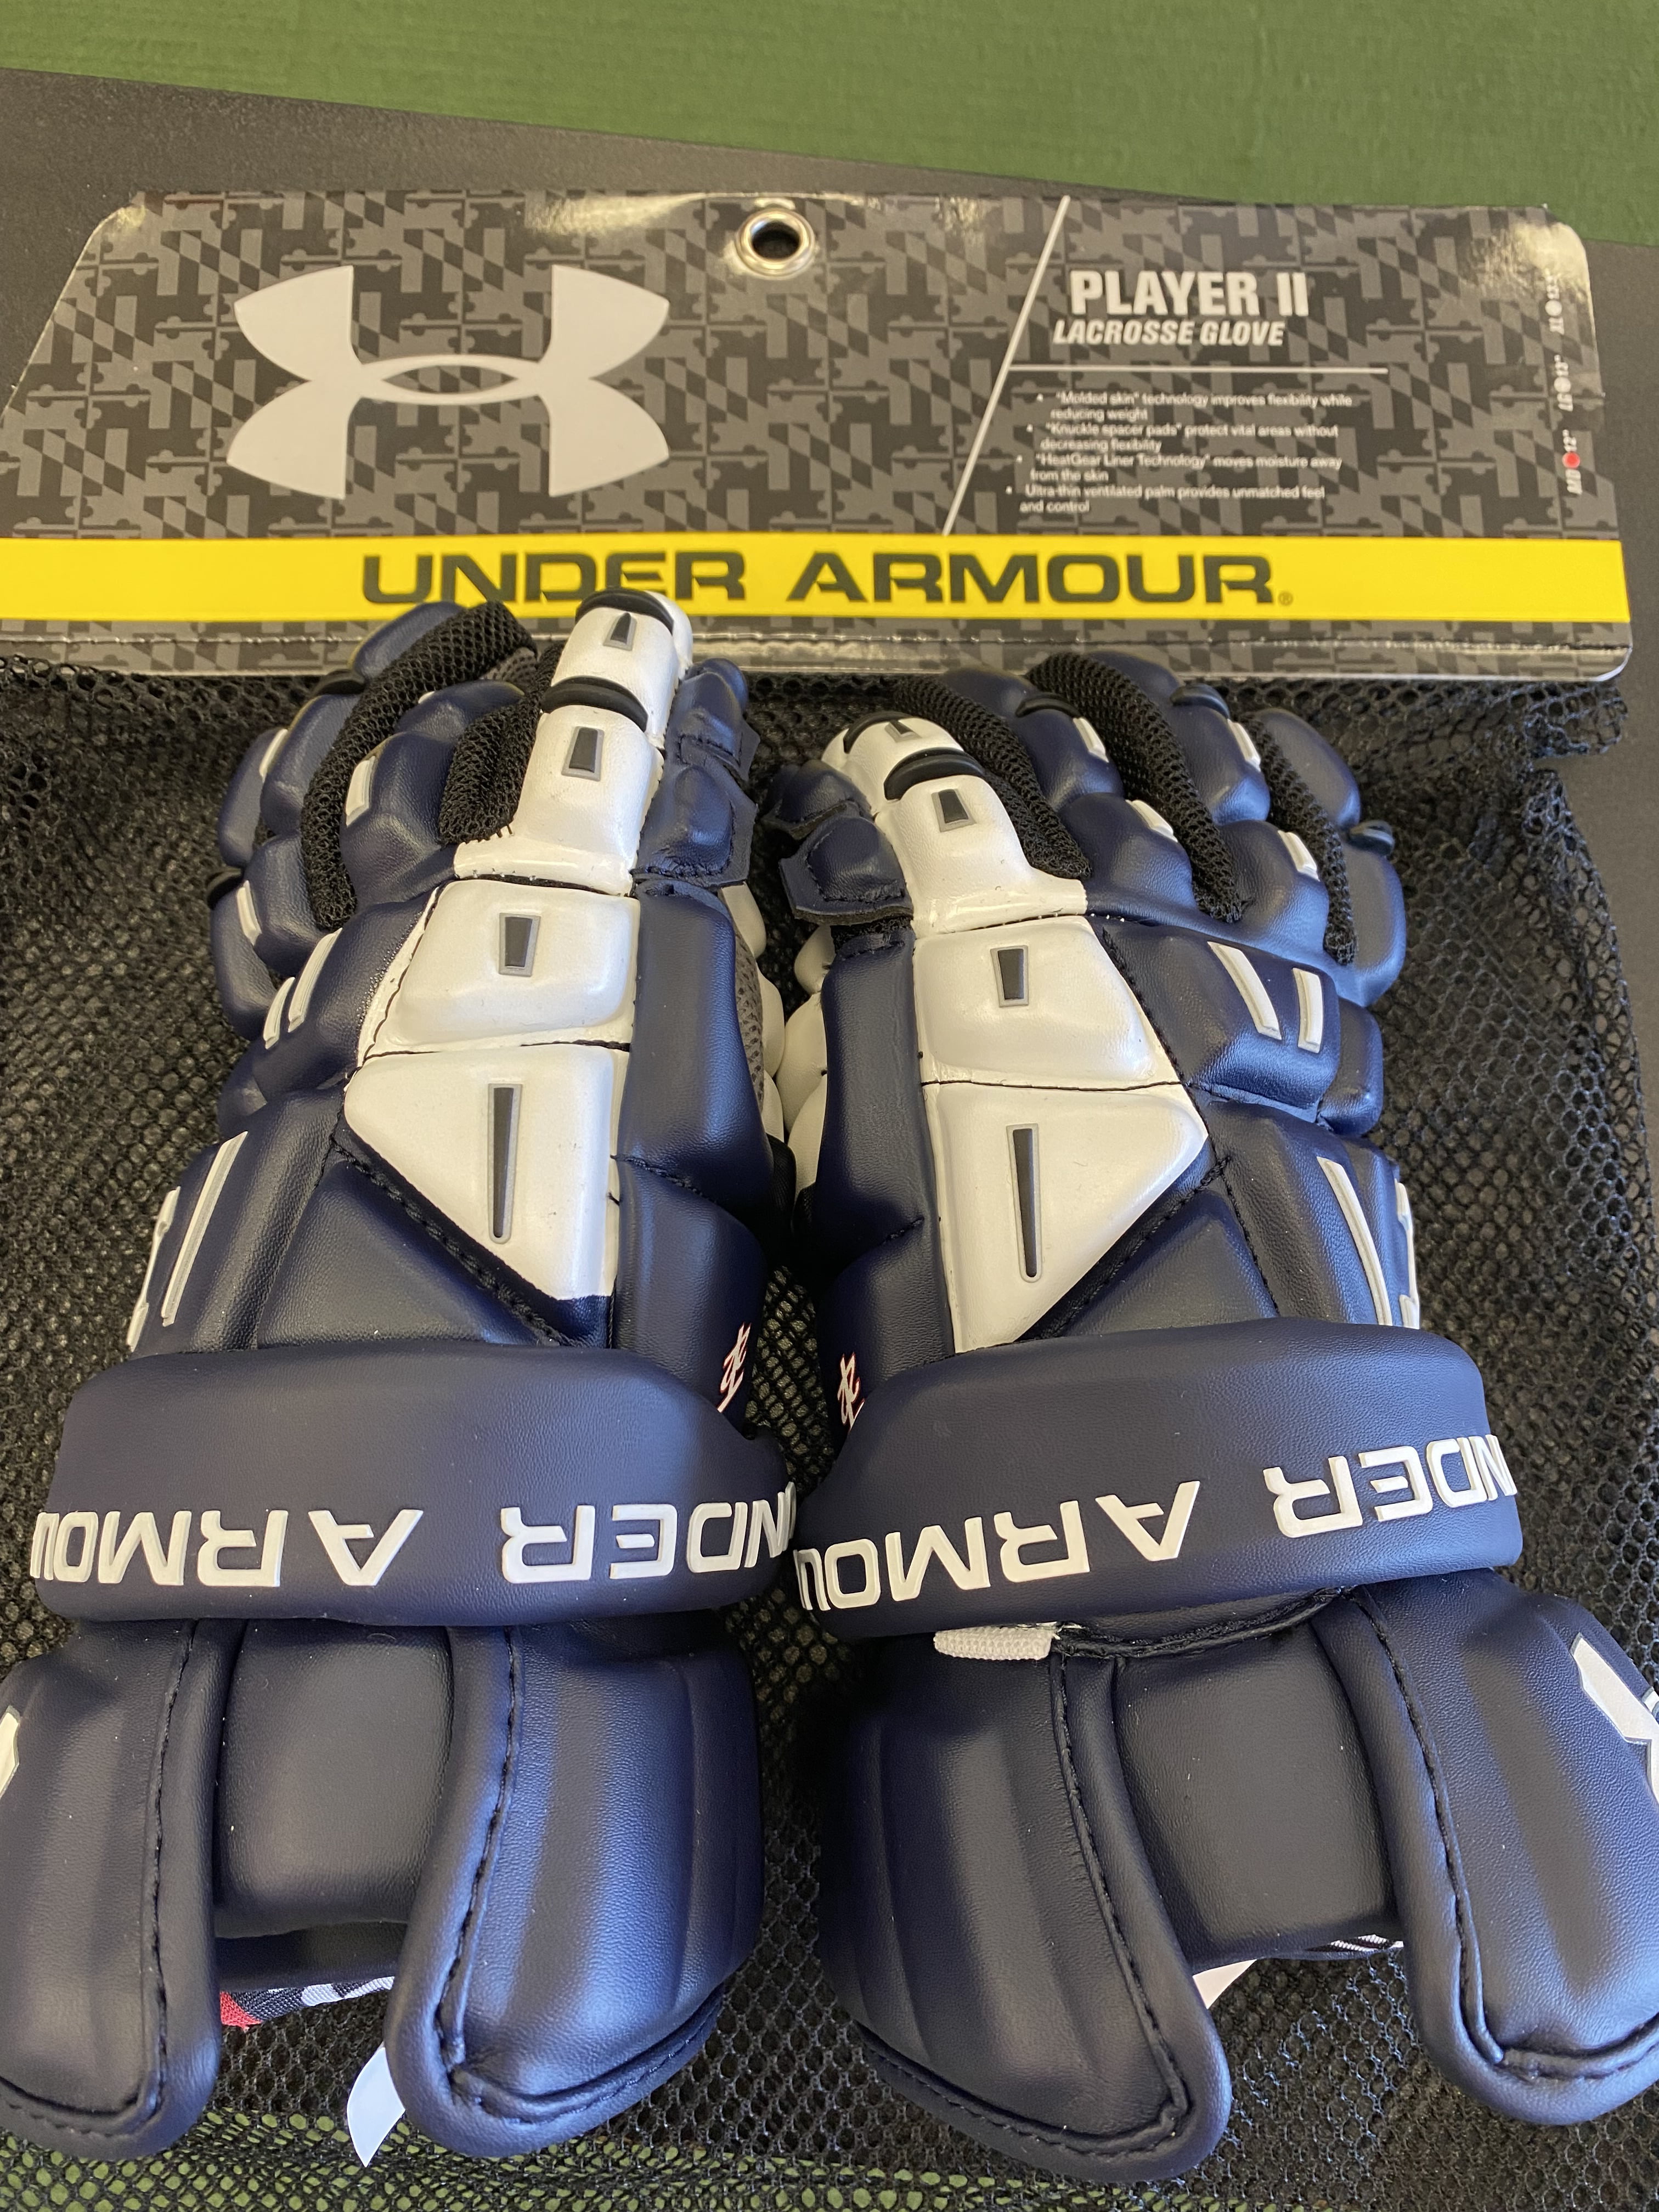 Details about   NEW Under Armour Illusion Women's Medium Blue Lacrosse Field Hockey Gloves 